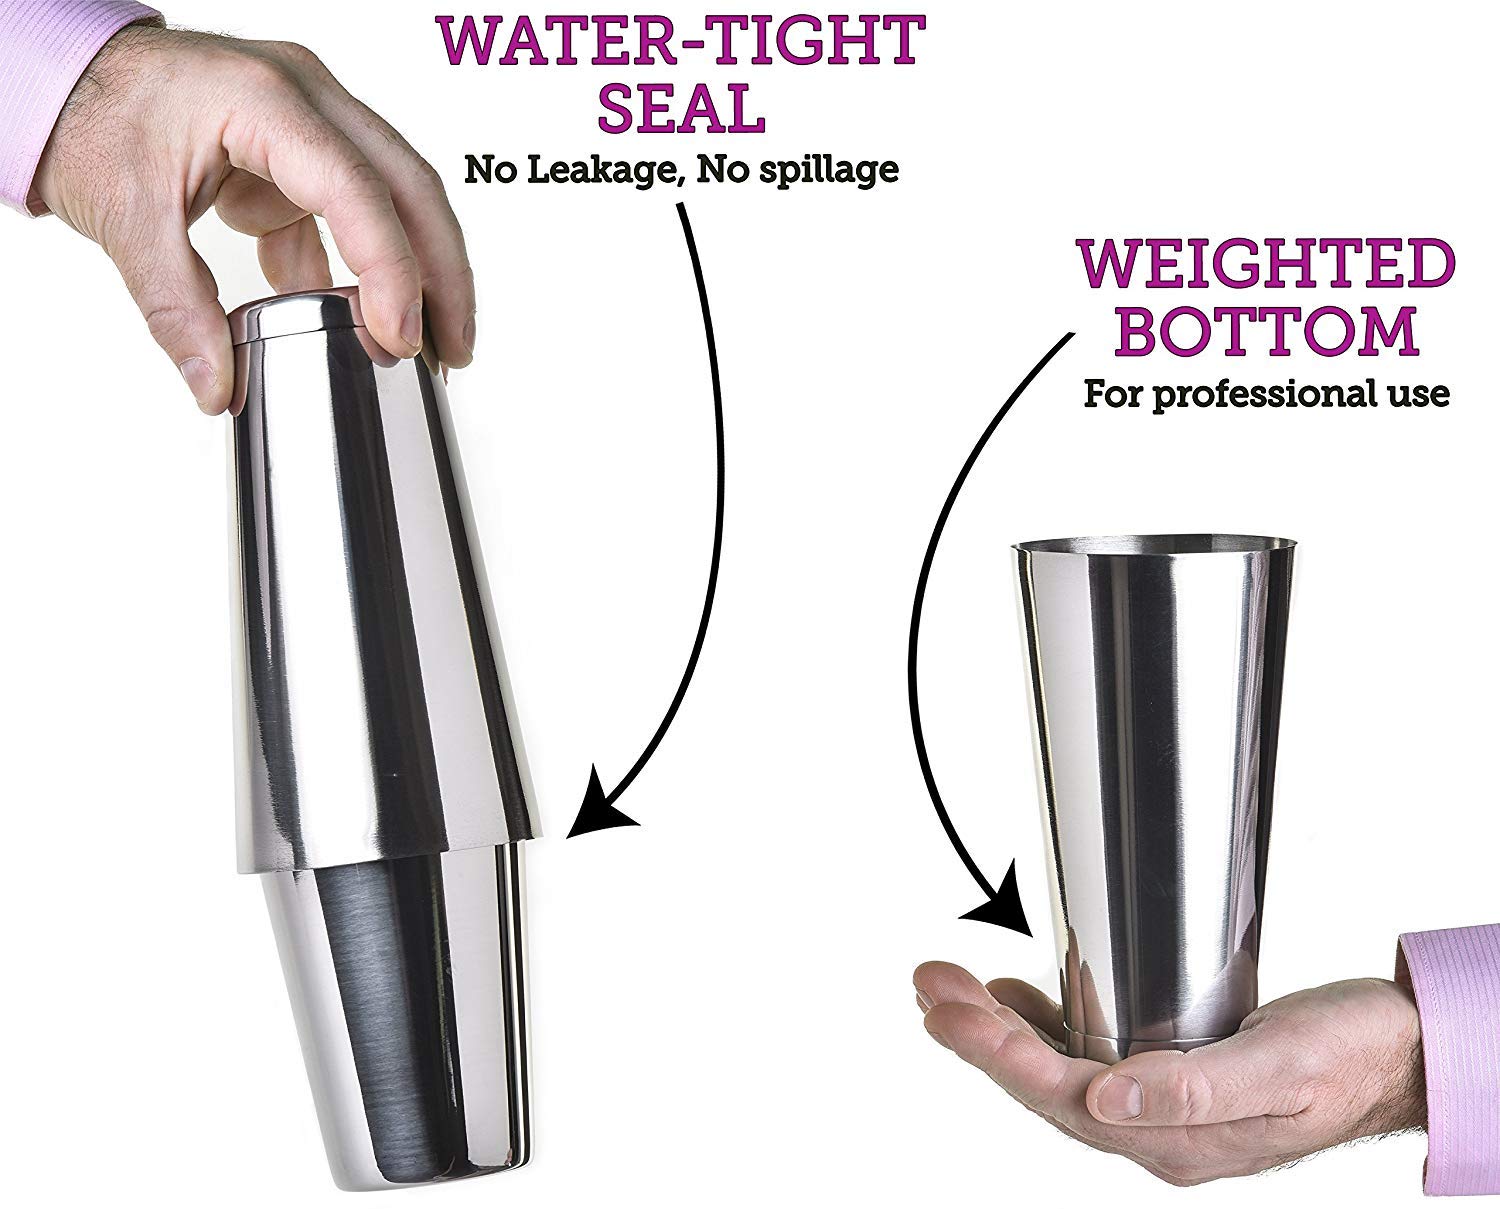 NJ Stainless Steel Boston Shaker, Professional Bartender Cocktail Shaker Set : 540 ml & 840 ml Tins are Dual Weighted Bases, Perfect for Beginner in Bartending : 2 Pcs Set